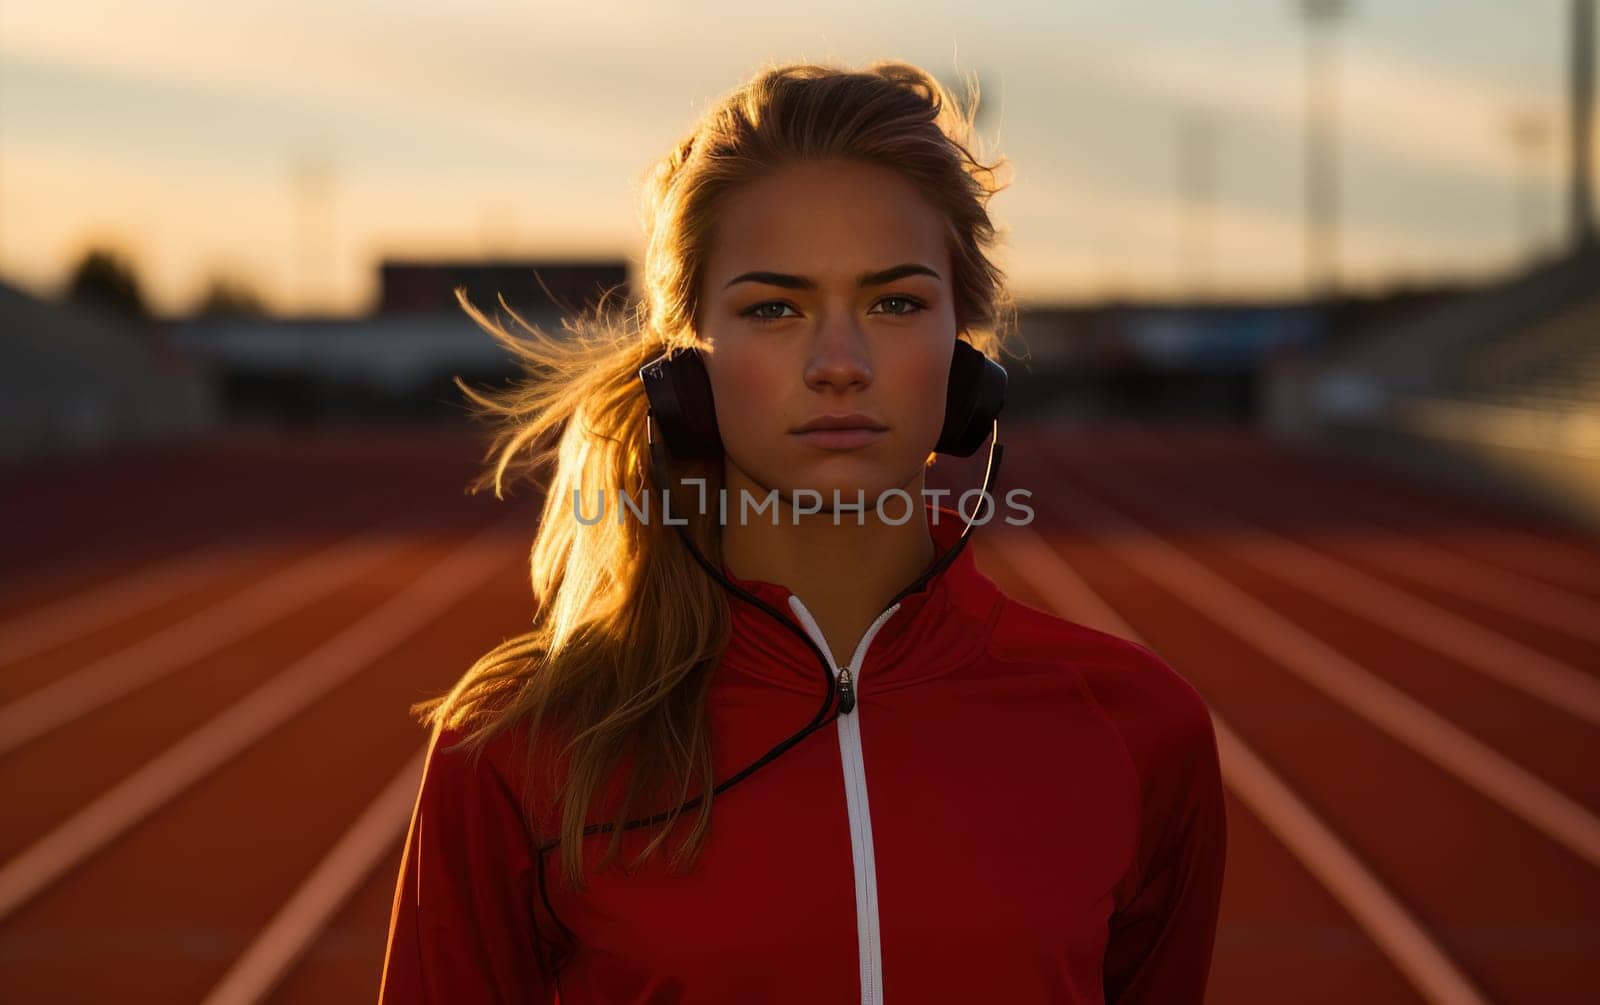 Beautiful girl runner in headphones at stadium. Young athletic woman listens to music on headphones and gets ready for a cardio workout. Healthy lifestyle, concept of a beautiful and healthy body. AI